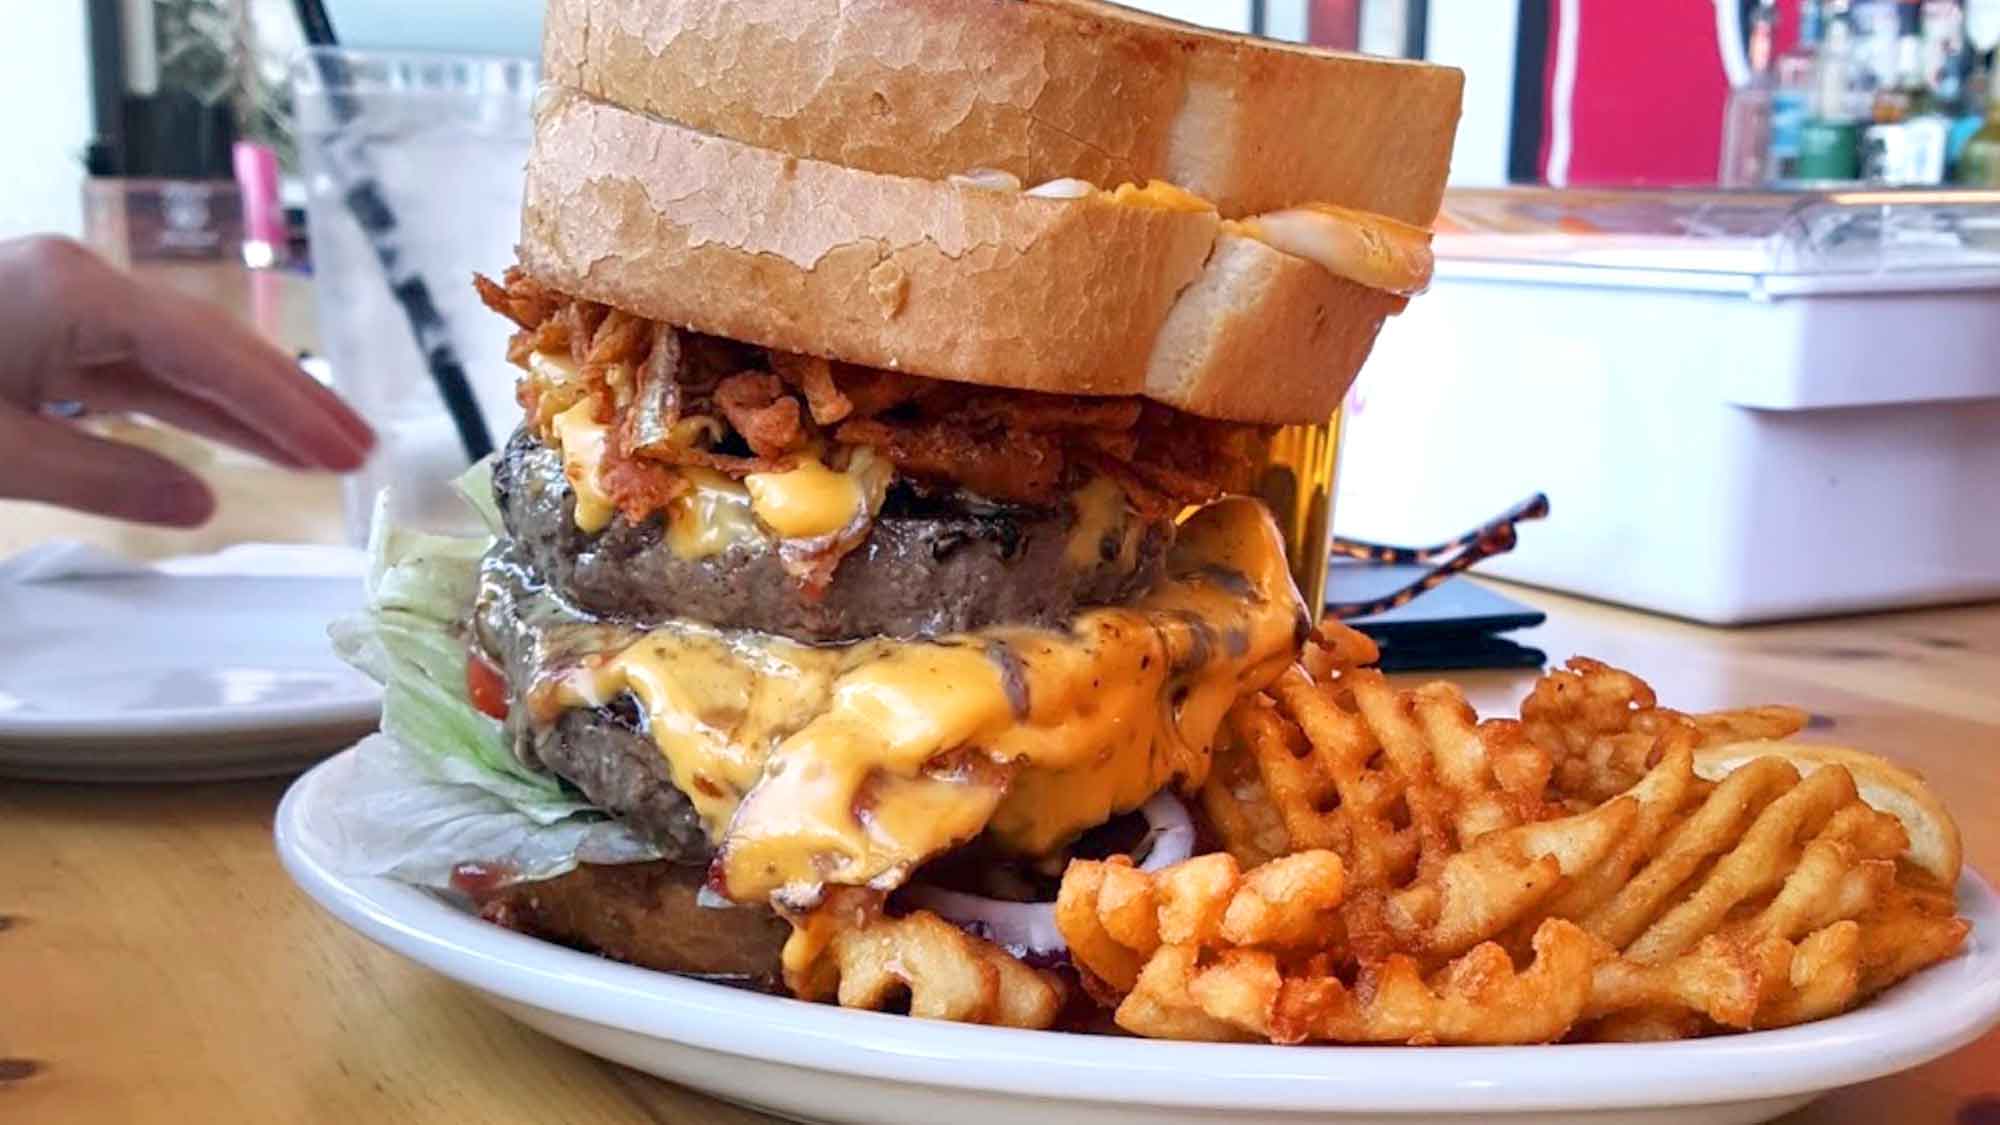 The Sasquatch Burger: Would You Order This Monstrous Hamburger? Could You Finish It?